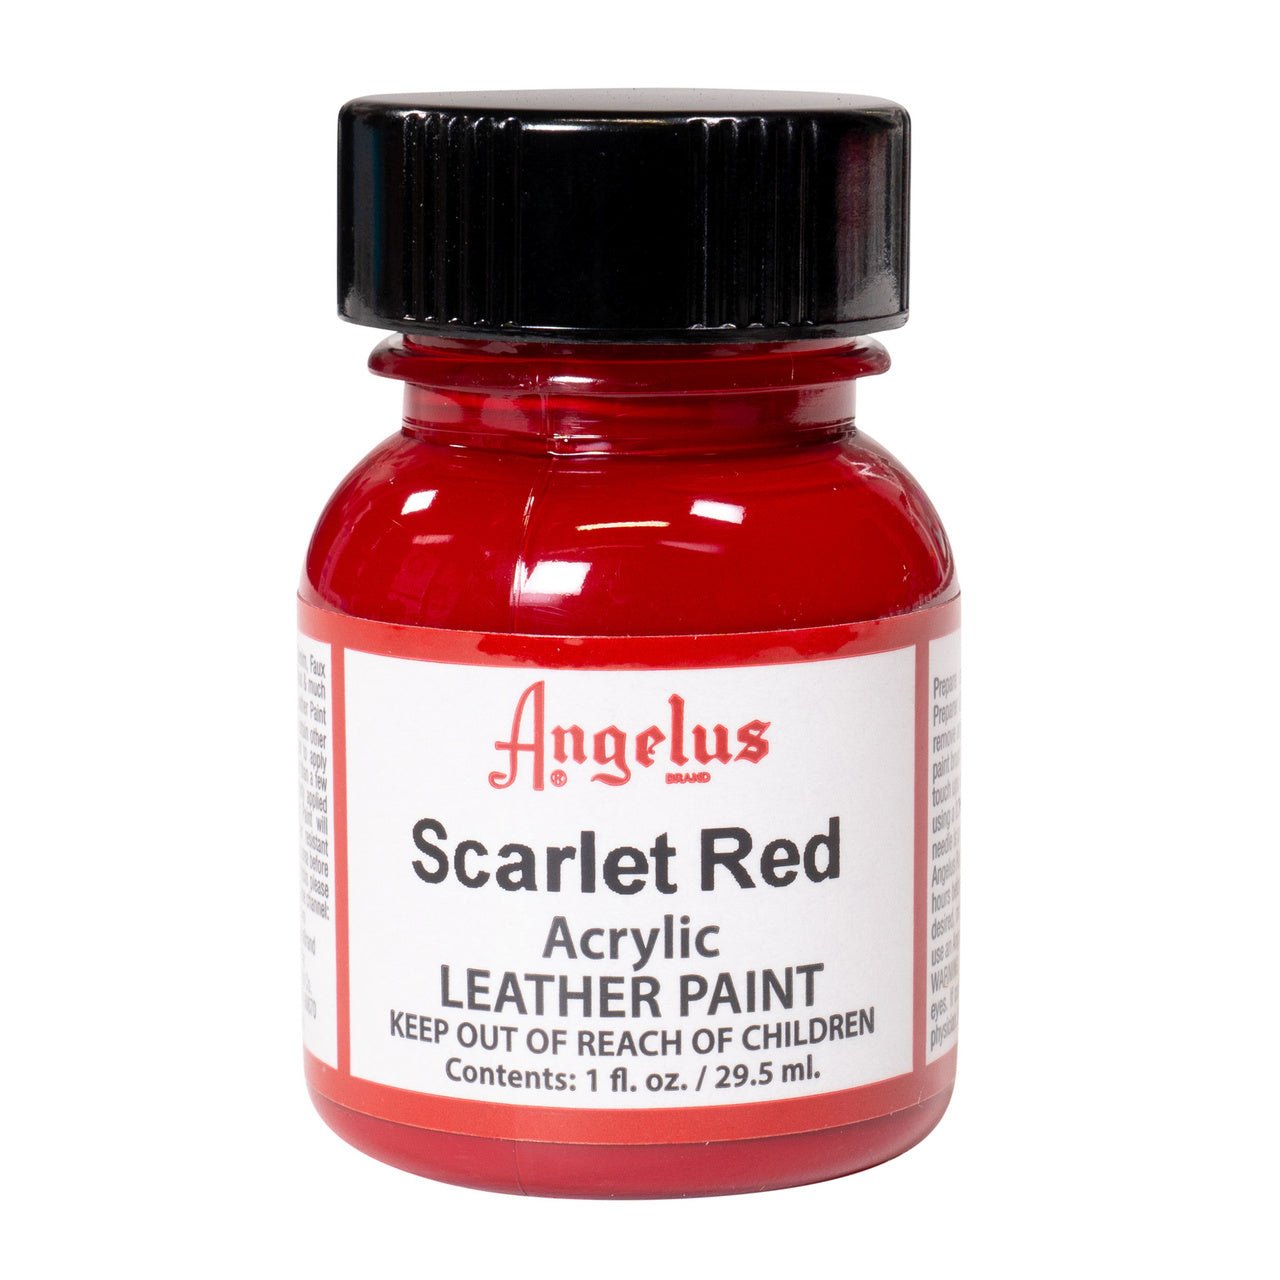 Angelus Acrylic Leather Paint - 1 oz. Bottle - Scarlet Red - merriartist.com